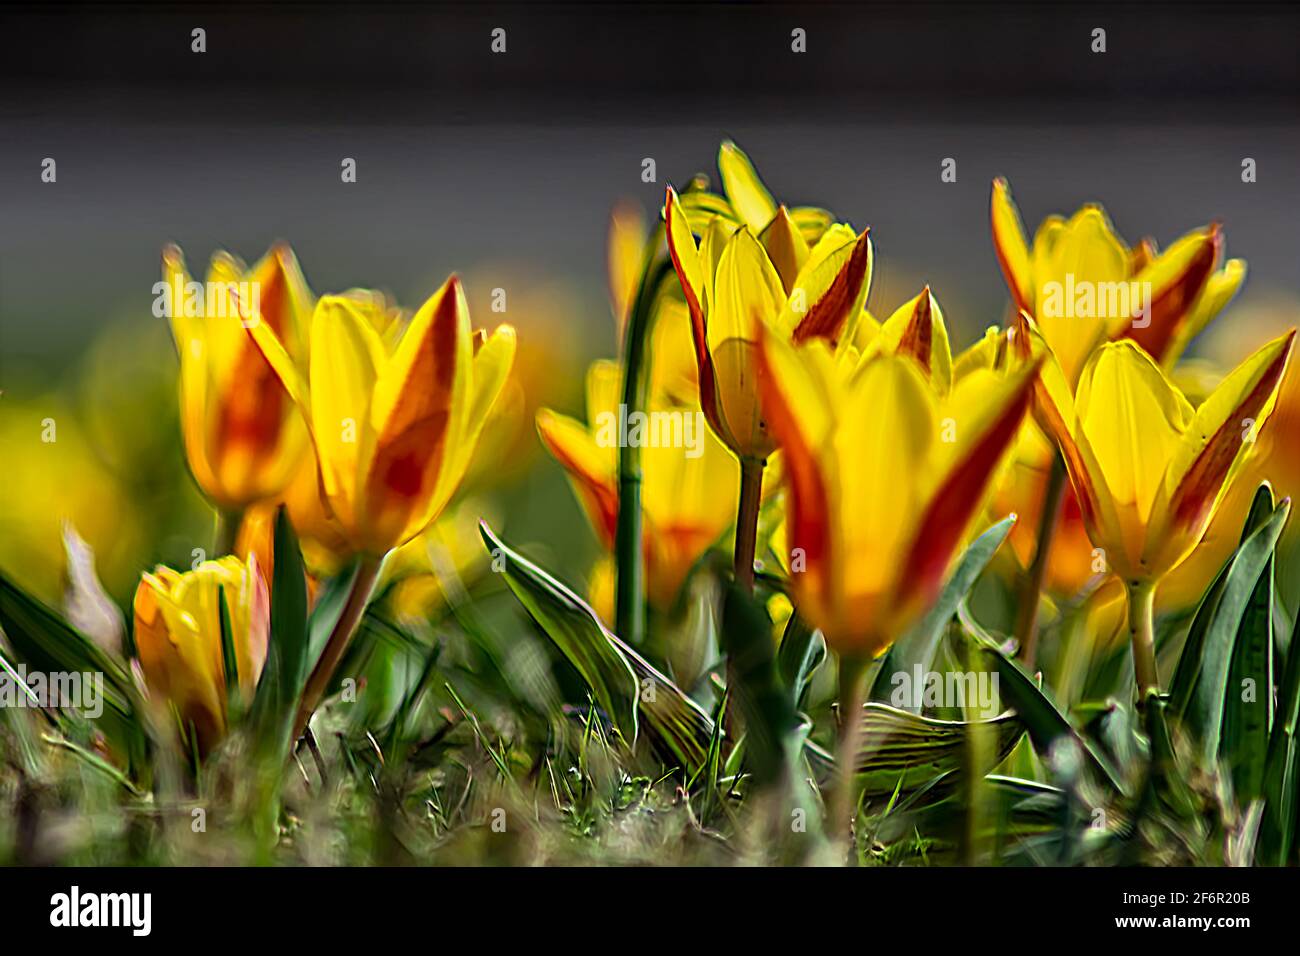 Floral : Blooming tulips Stock Photo